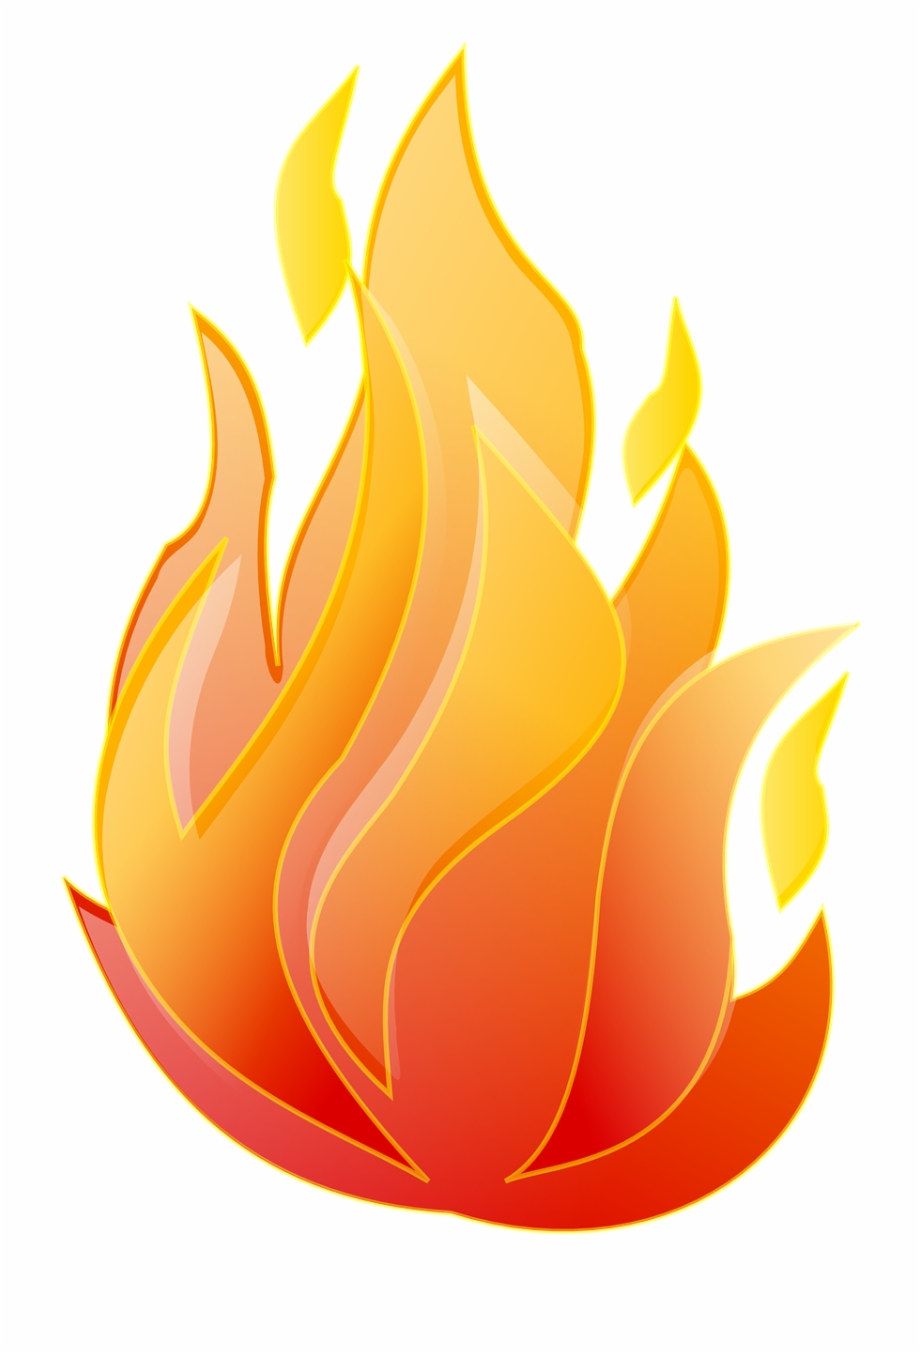 Free Animated Fire Gif Transparent Background, Download Free